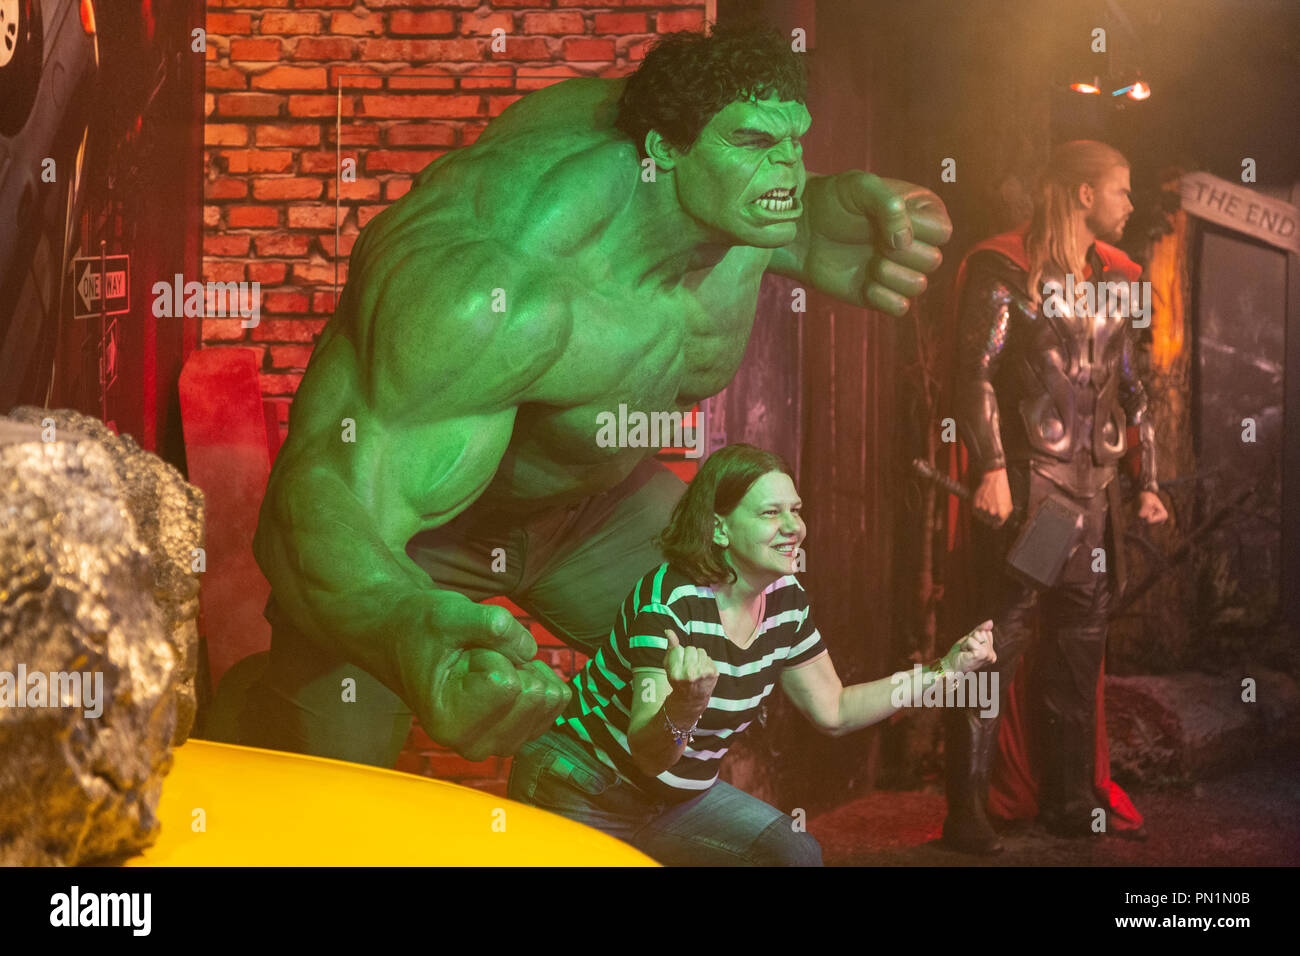 Hulk, Bruce Banner, Marvel section, Madame Tussauds wax museum in Amsterdam, Netherlands Stock Photo